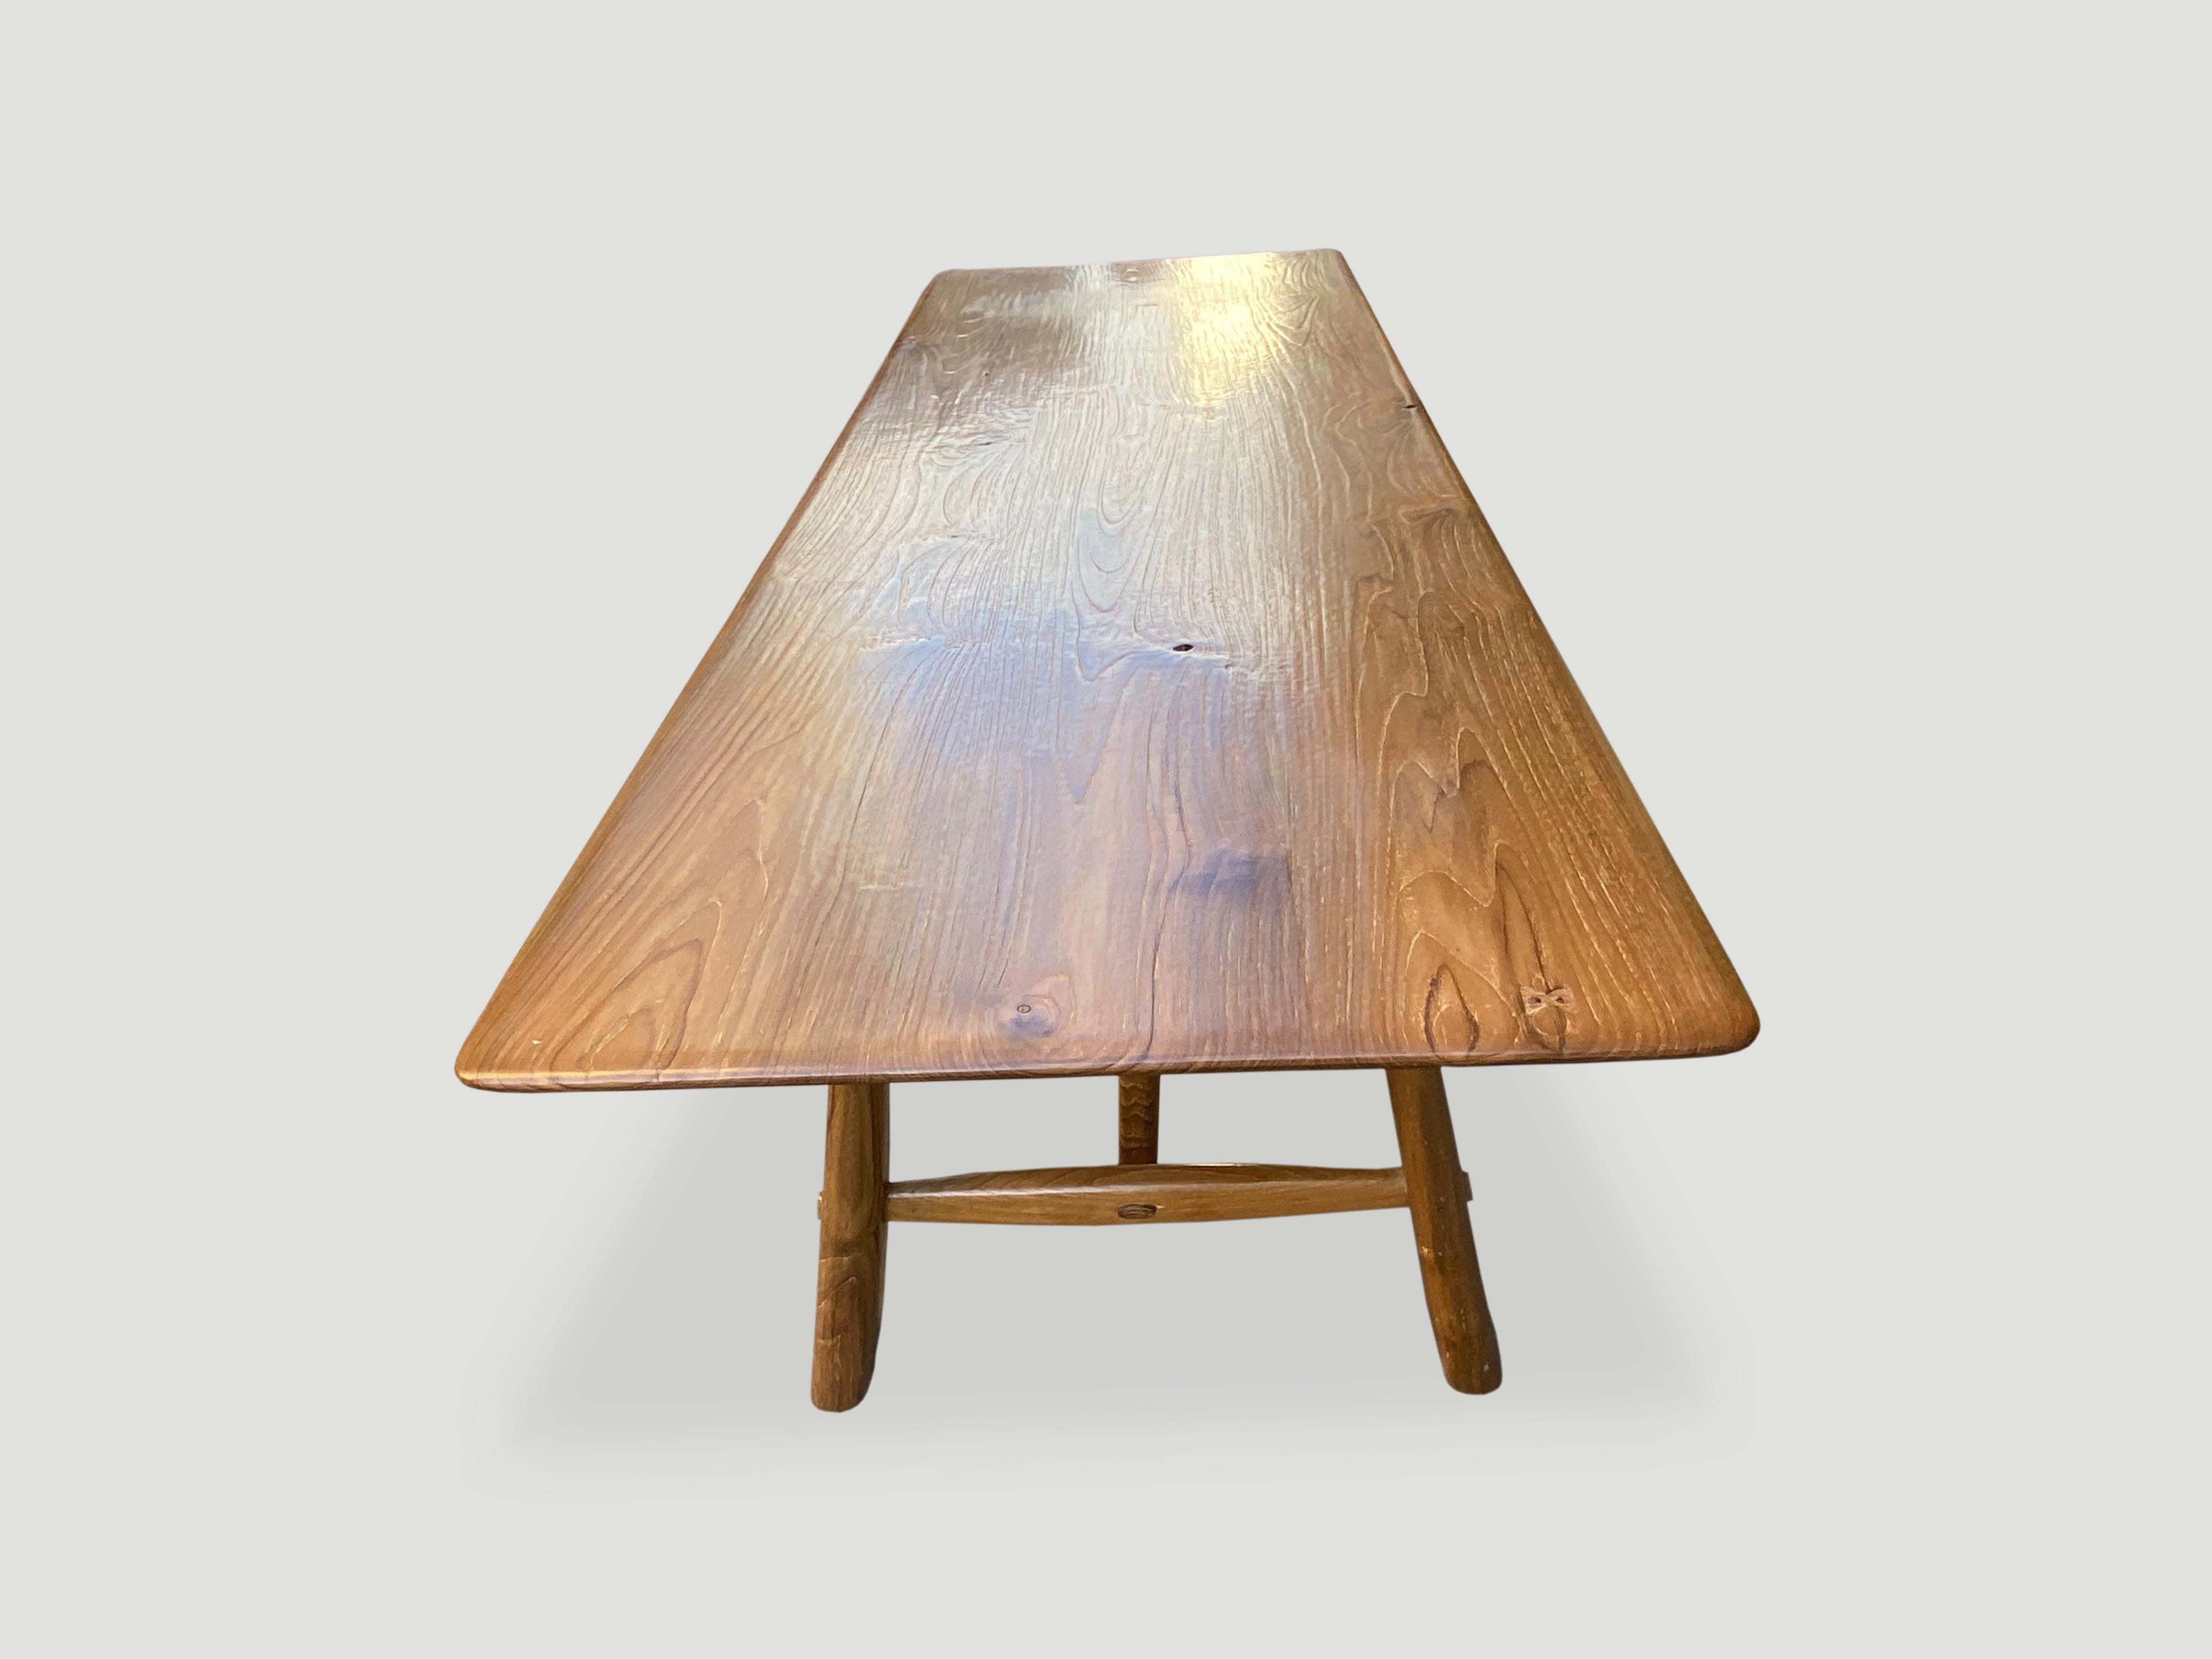 Andrianna Shamaris Midcentury Couture Teak Wood Dining Table For Sale 3